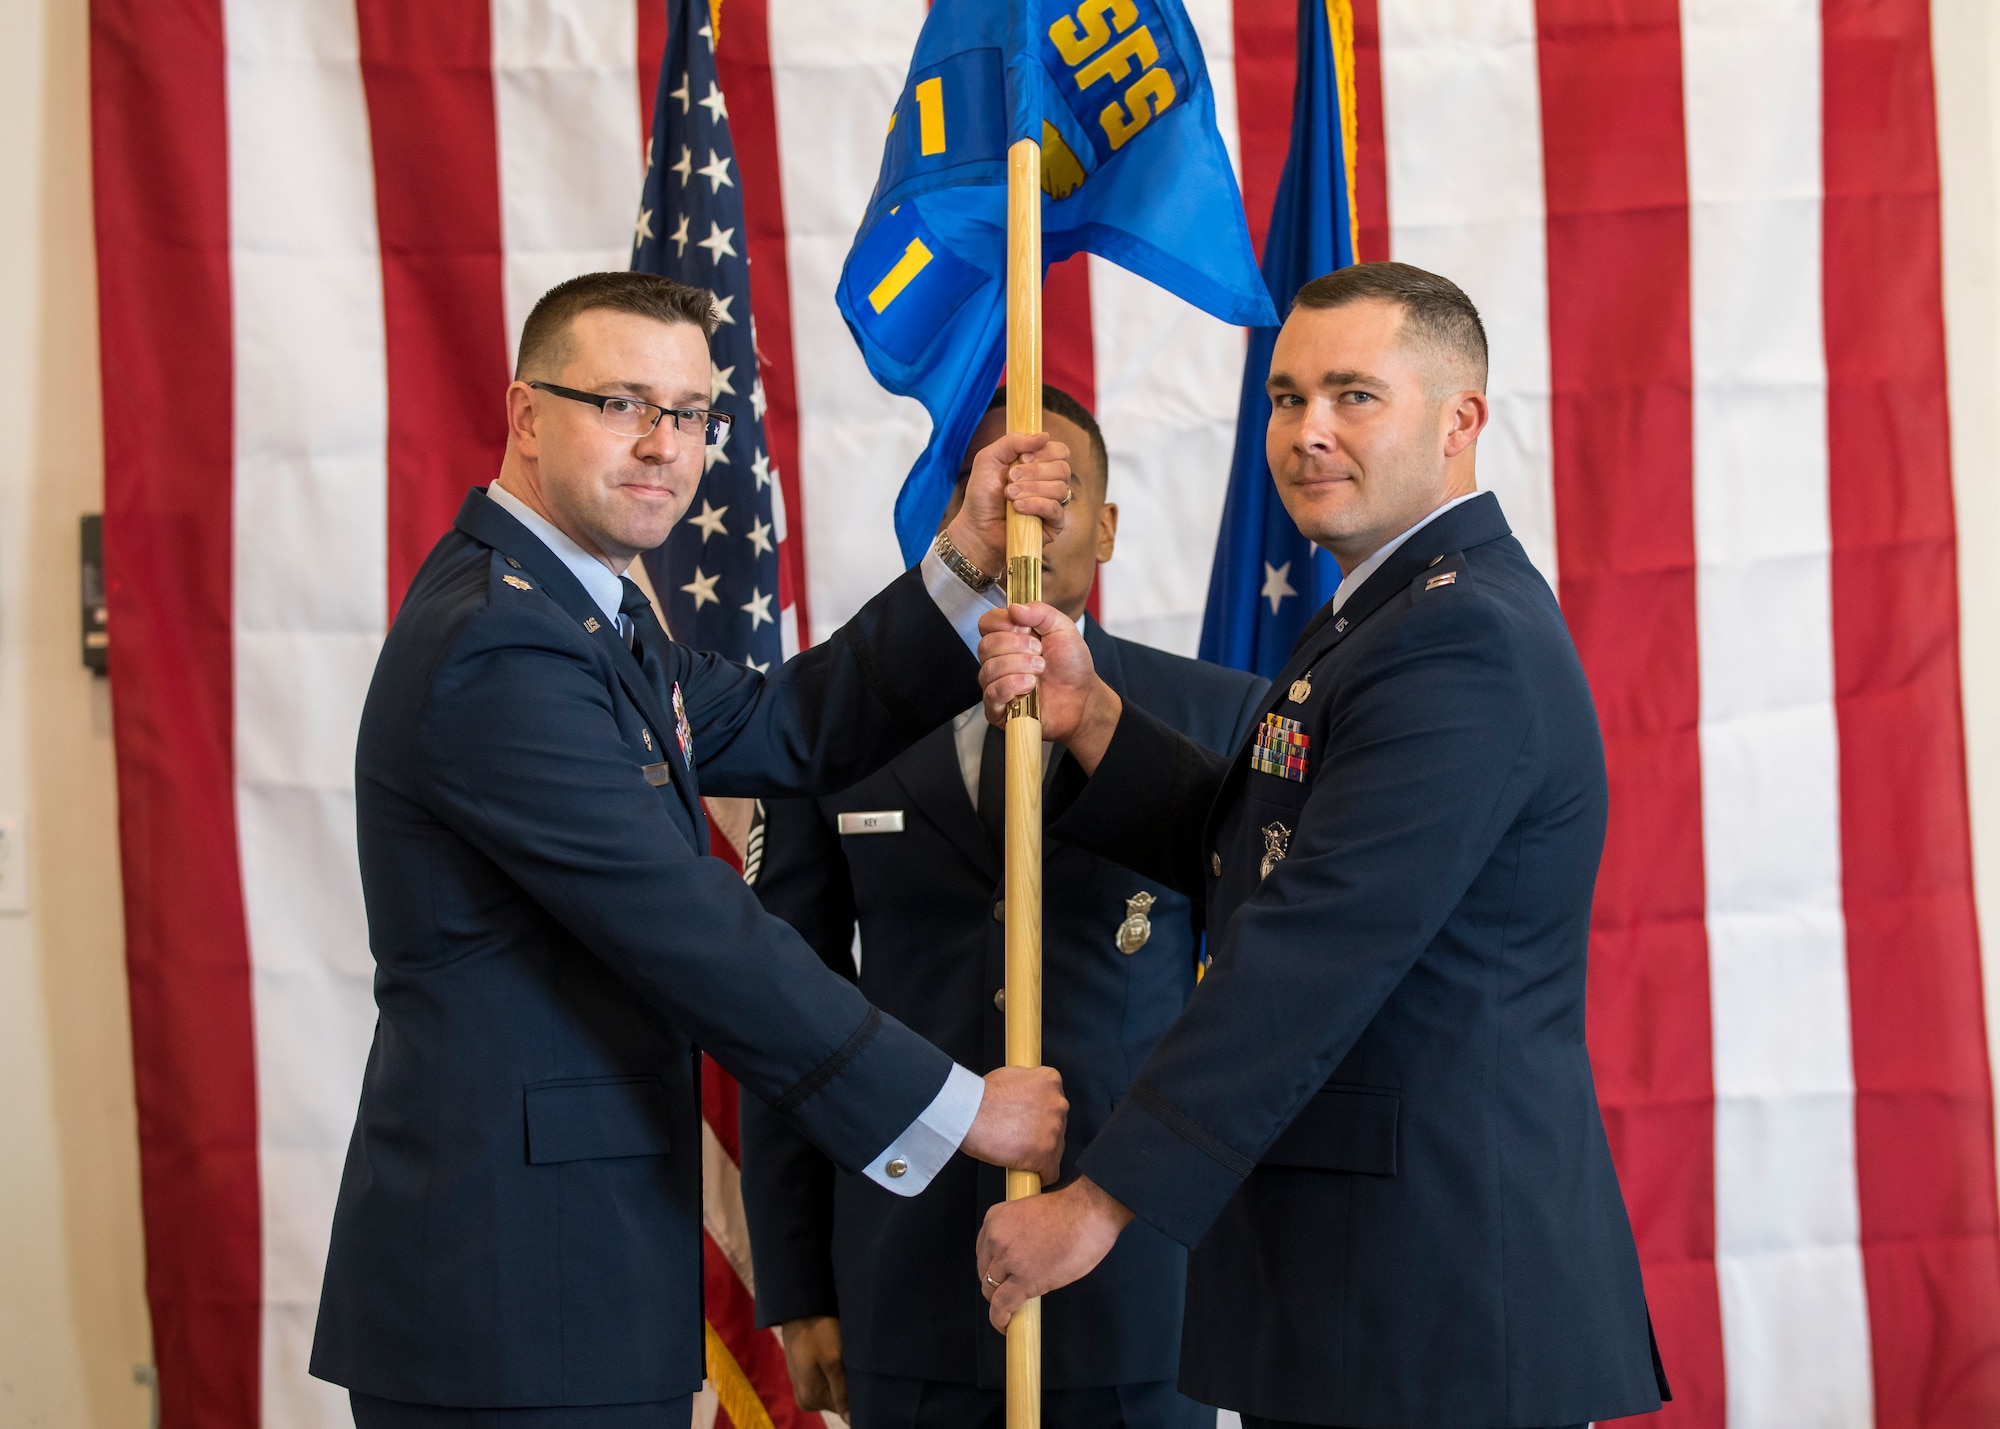 Lt. Col. Joseph Bincarousky, 412th Security Forces Squadron Commander, hands Detachment 1’s guidon to Capt. Daniel Parsons signifying his assumption of command and activation of the unit at 412th Test Wing Operation Location Plant 42 in Palmdale, California, Feb. 13. (Air Force photo by Giancarlo Casem)